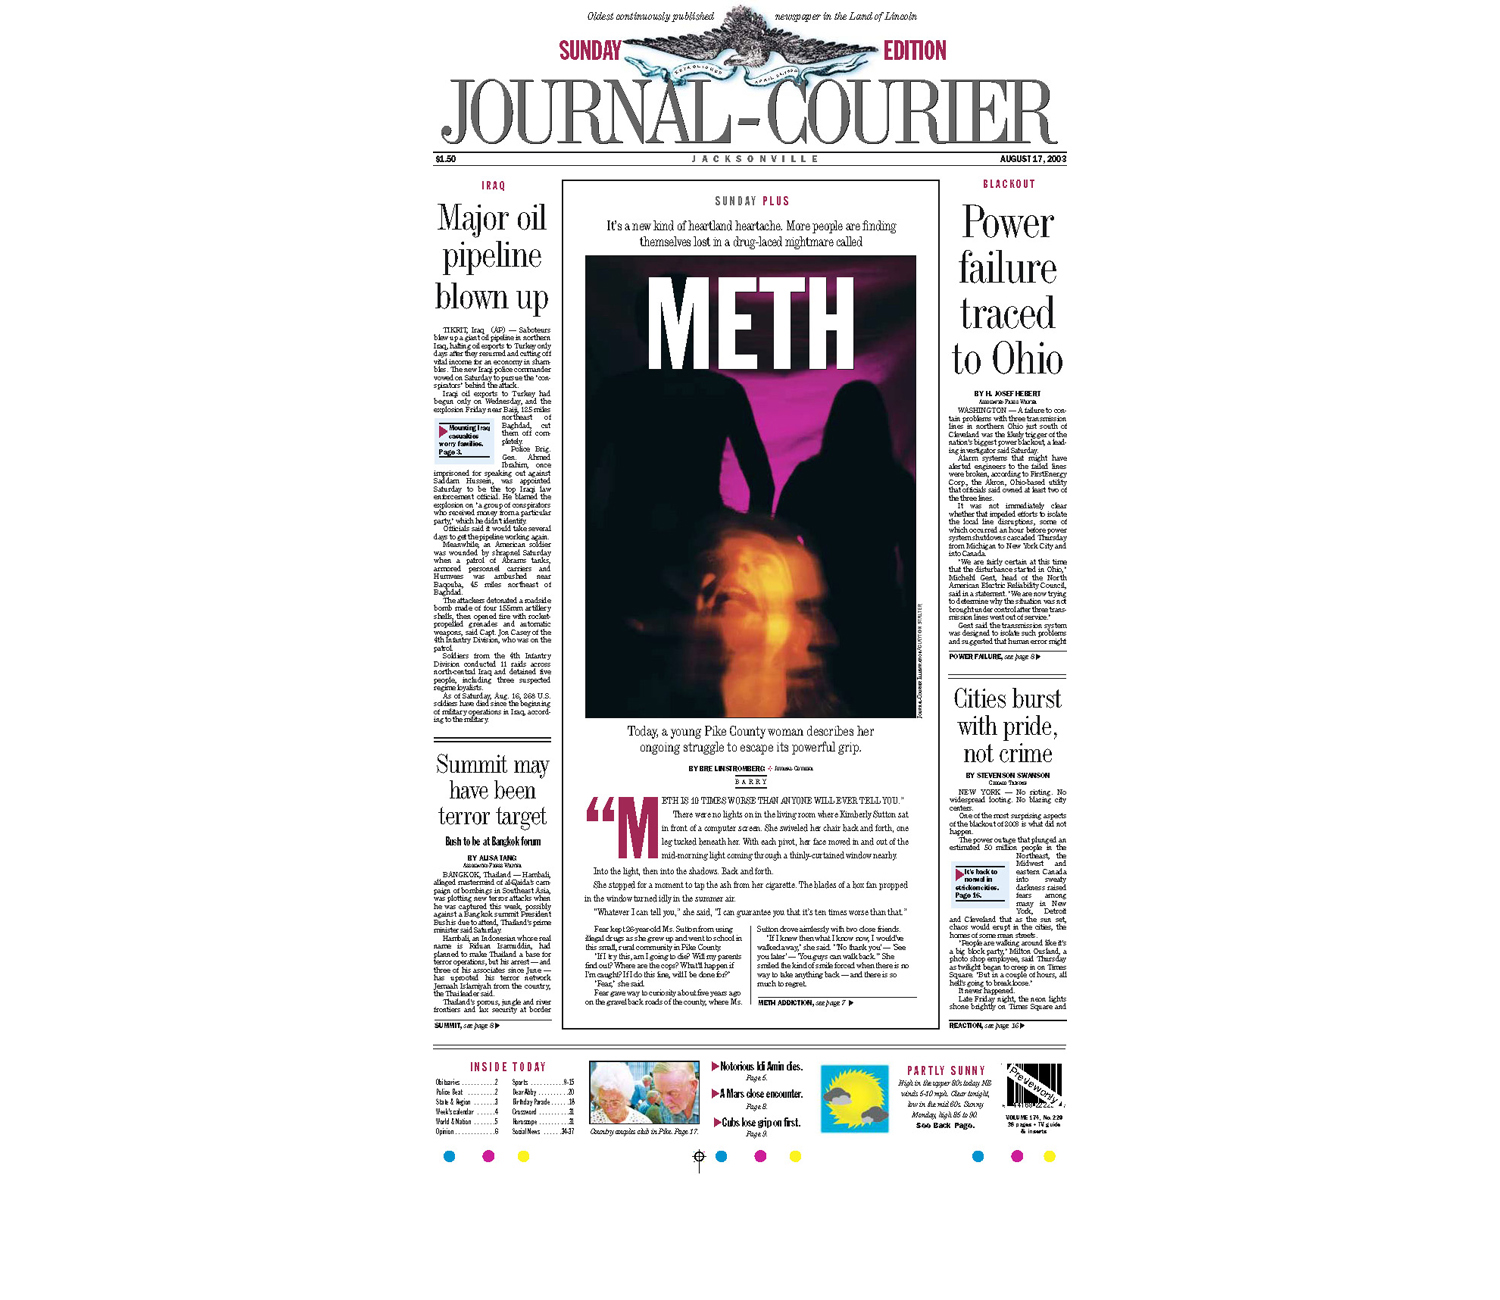  Illustration to accompany a front page story on meth addiction in which the subject did not want to be visually identified. 